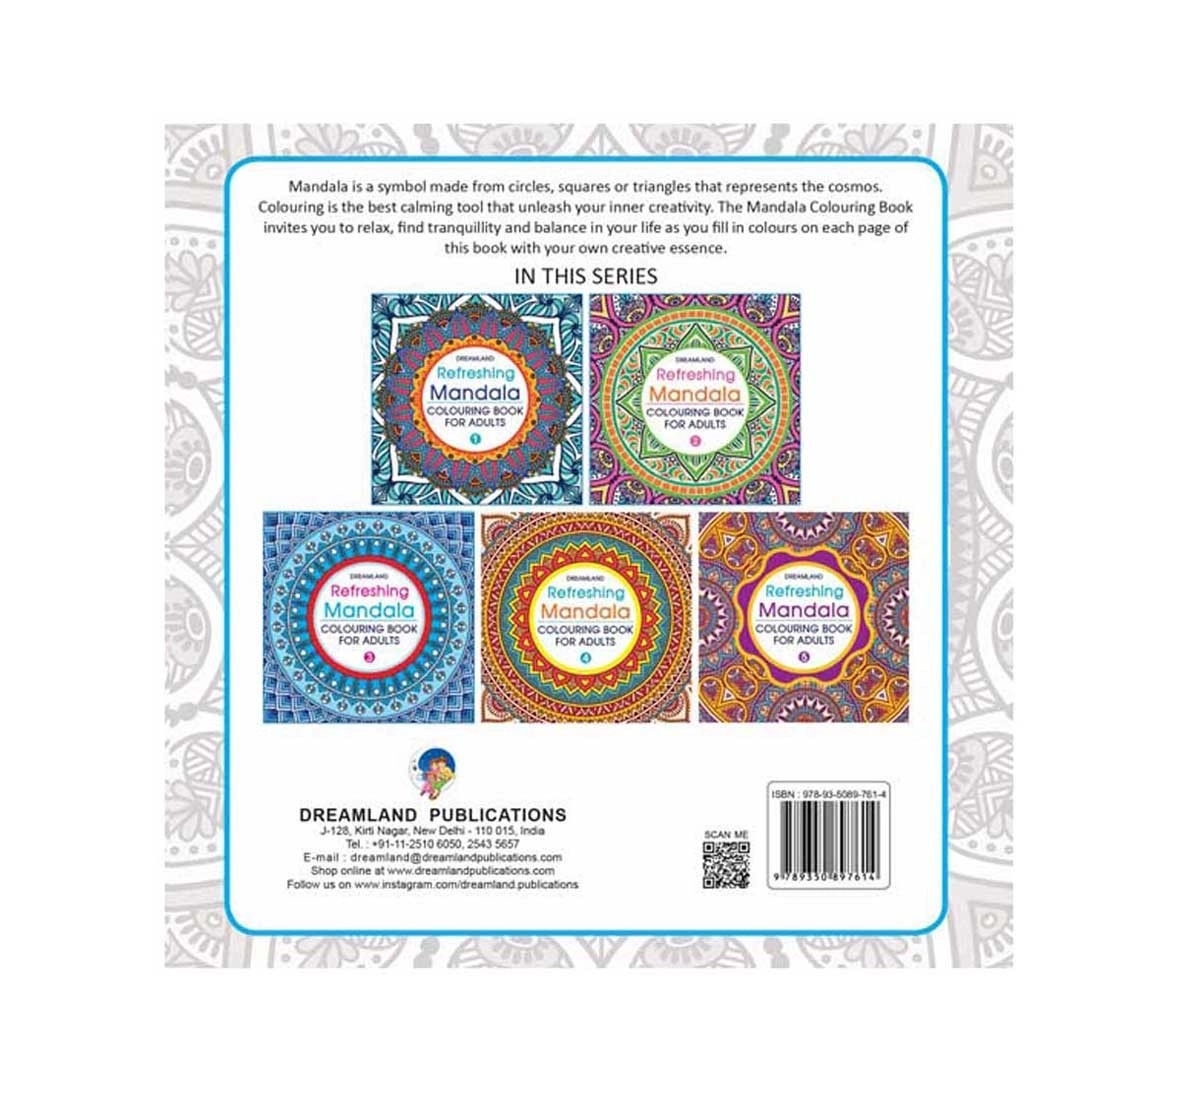 Dreamland Paperback Refreshing Mandala Part 2 Colouring Book for Adults 3Y+, Multicolour